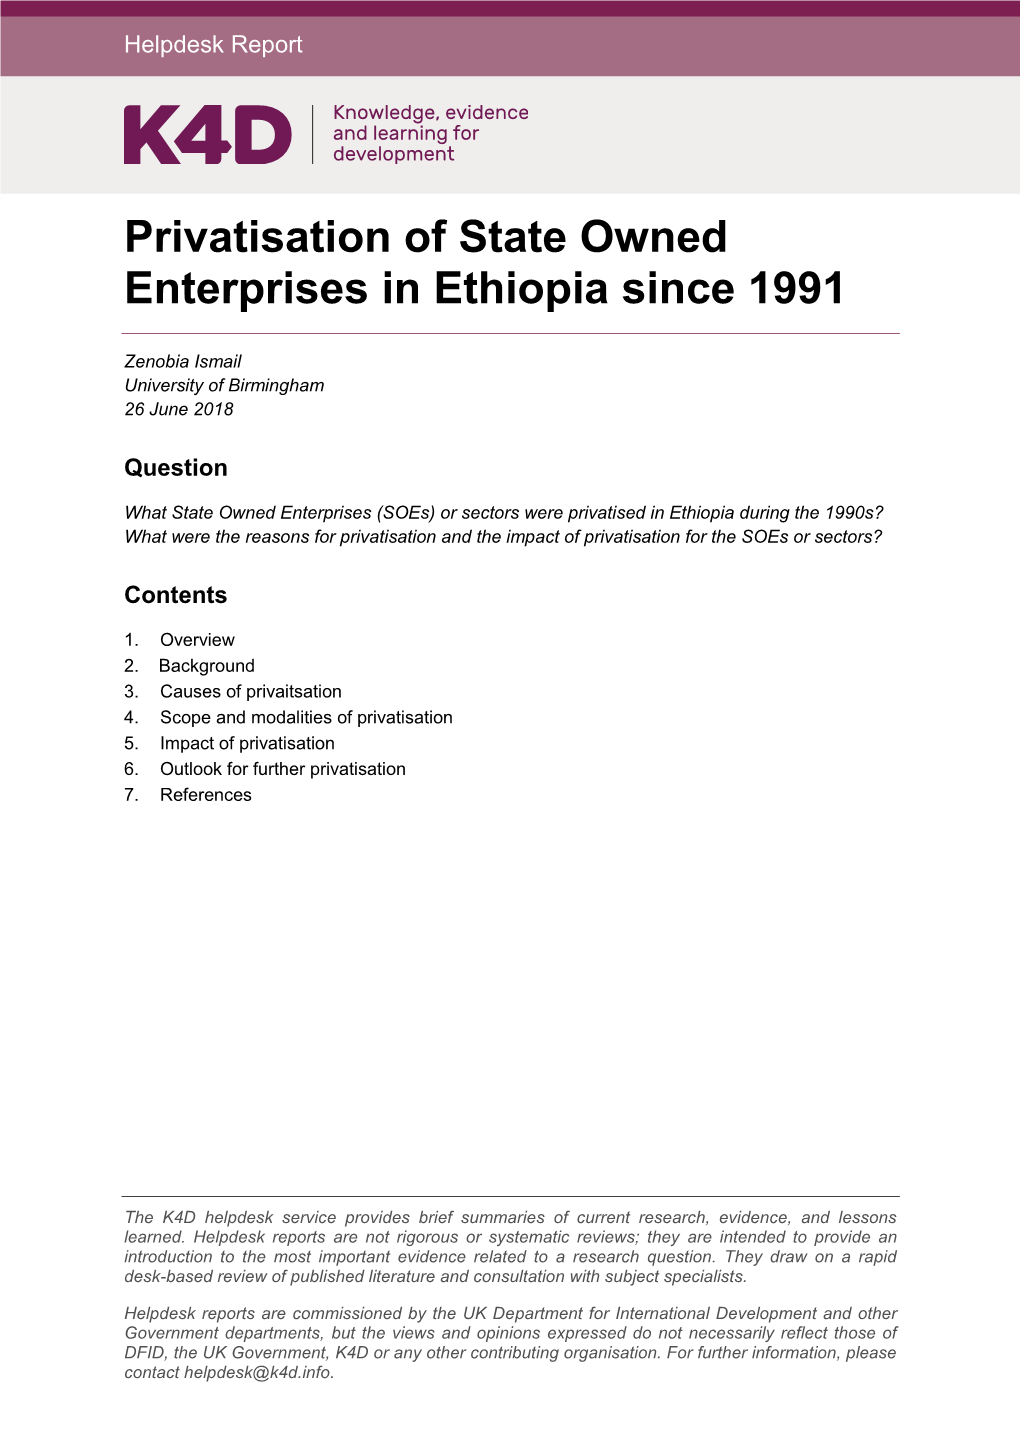 Privatisation of State Owned Enterprises in Ethiopia Since 1991